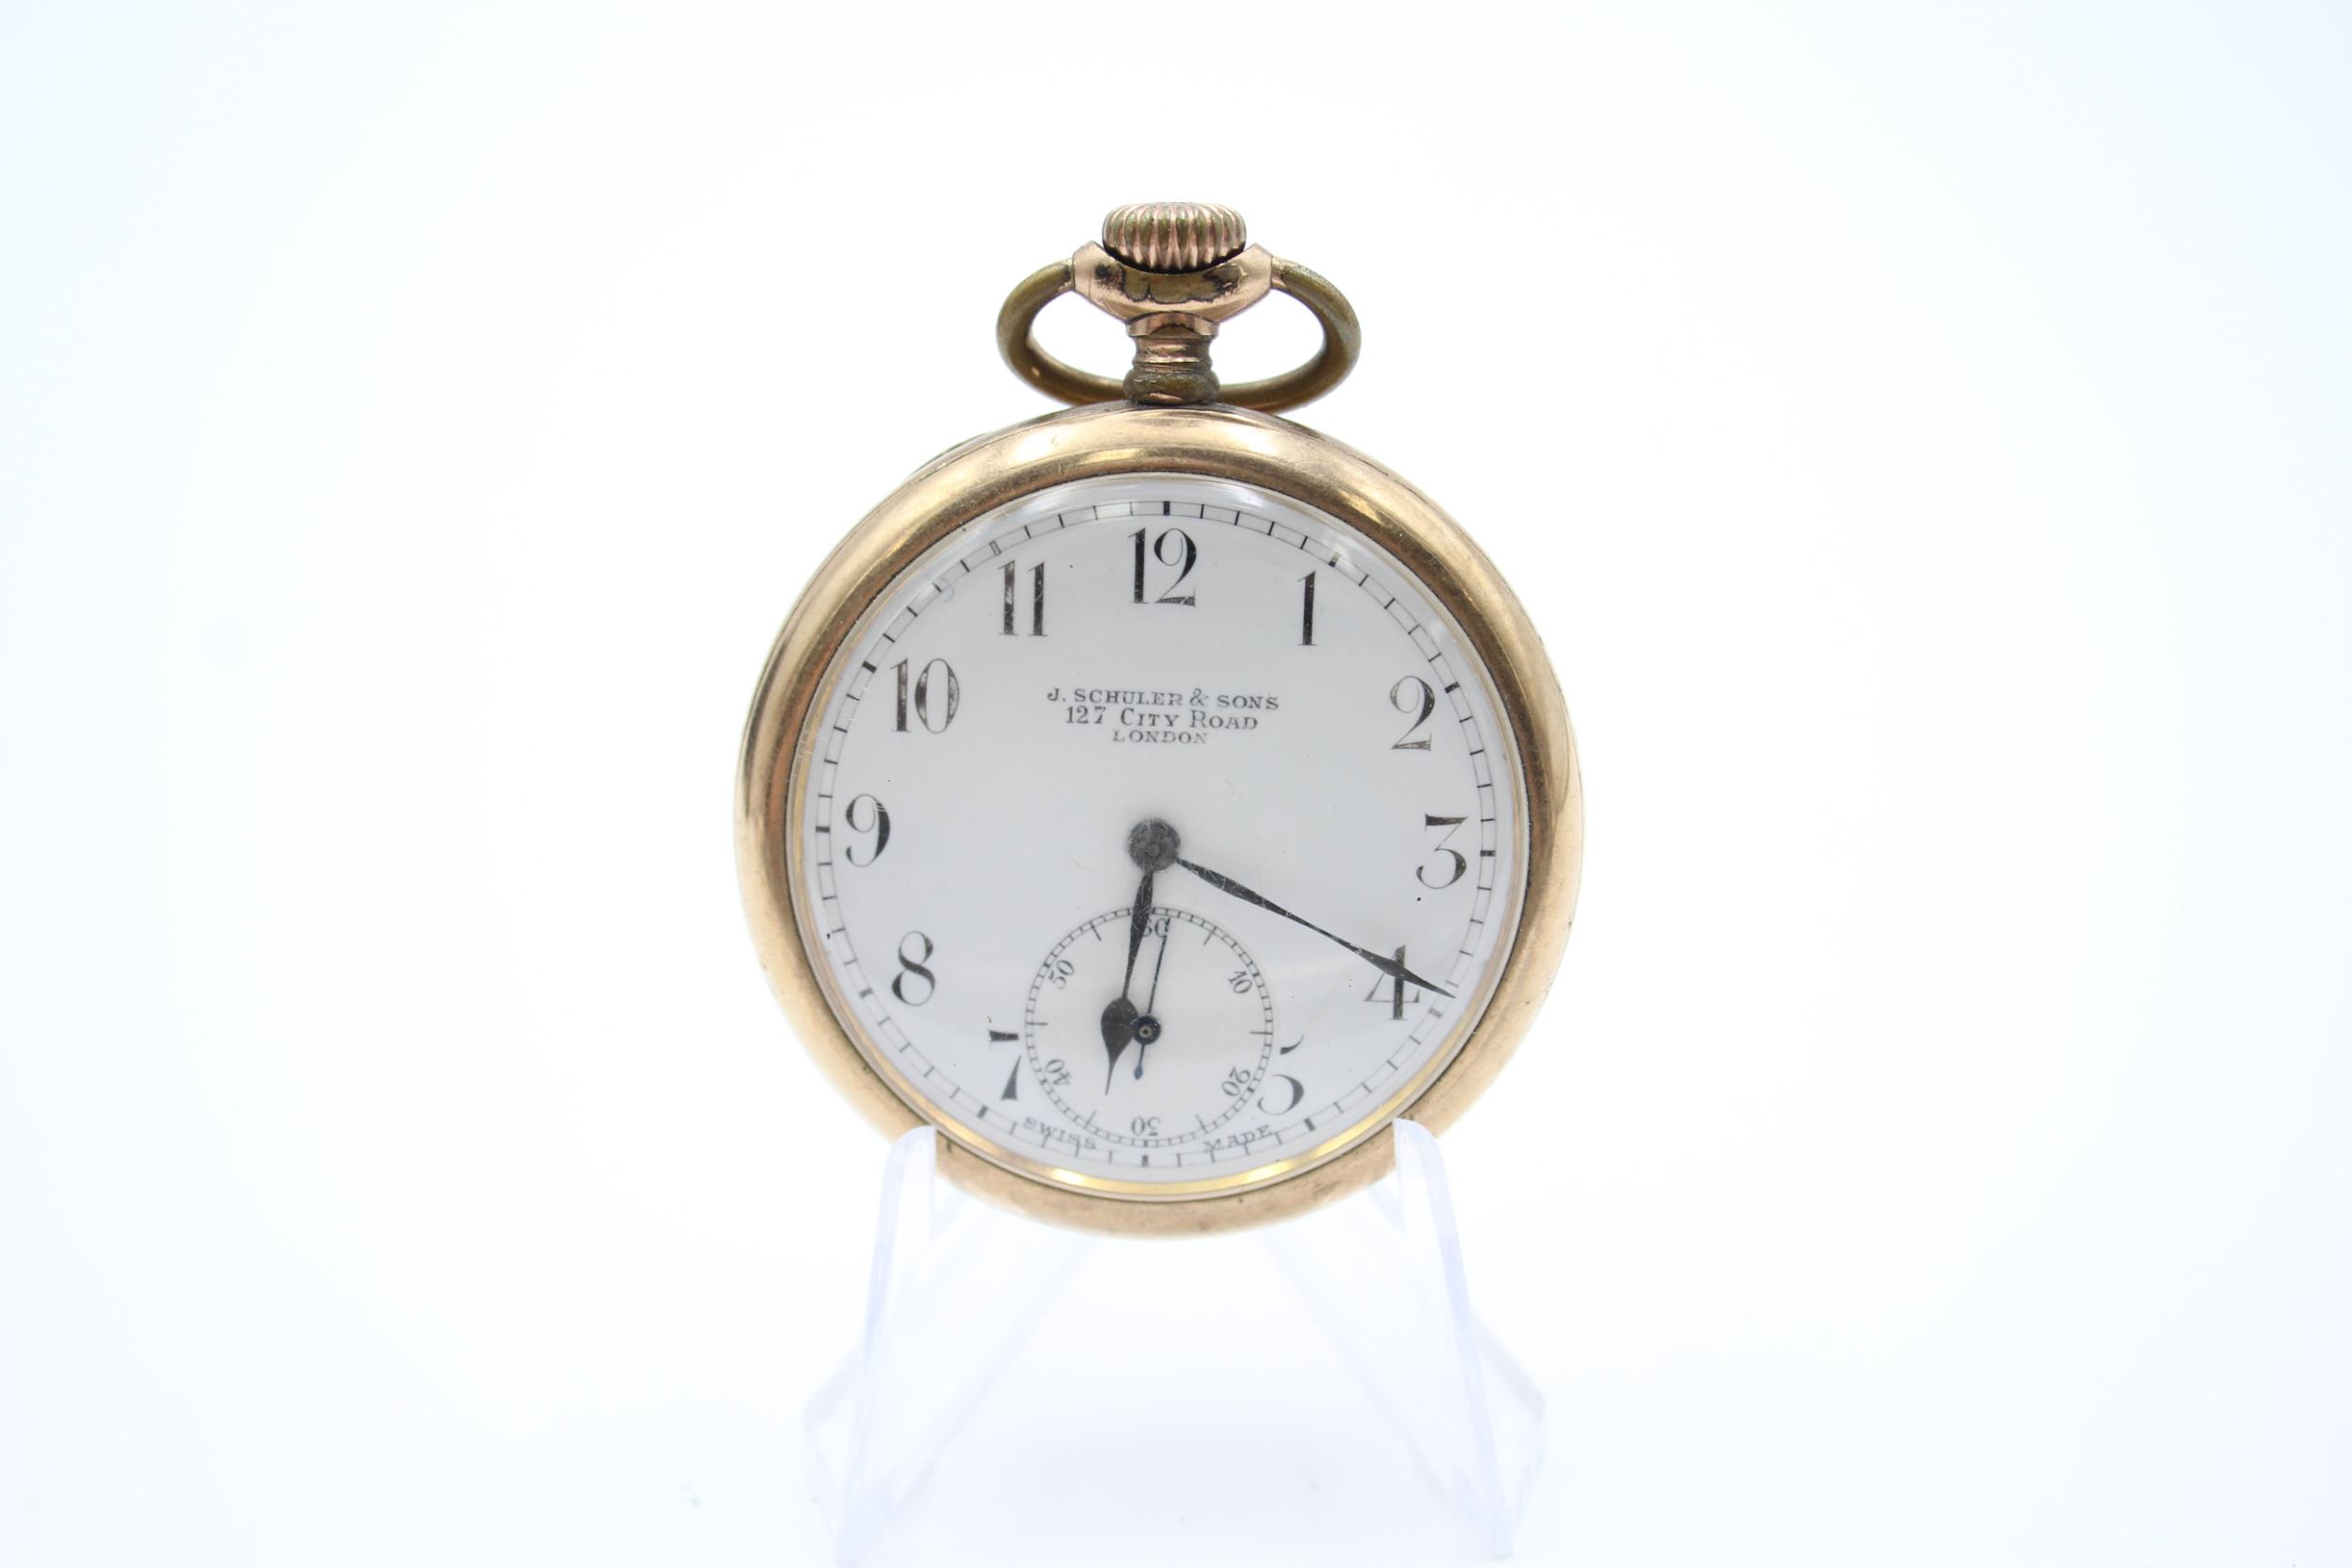 Gents Rolled Gold Open Face Pocket Watch Hand-wind WORKING - Gents Rolled Gold Open Face Pocket